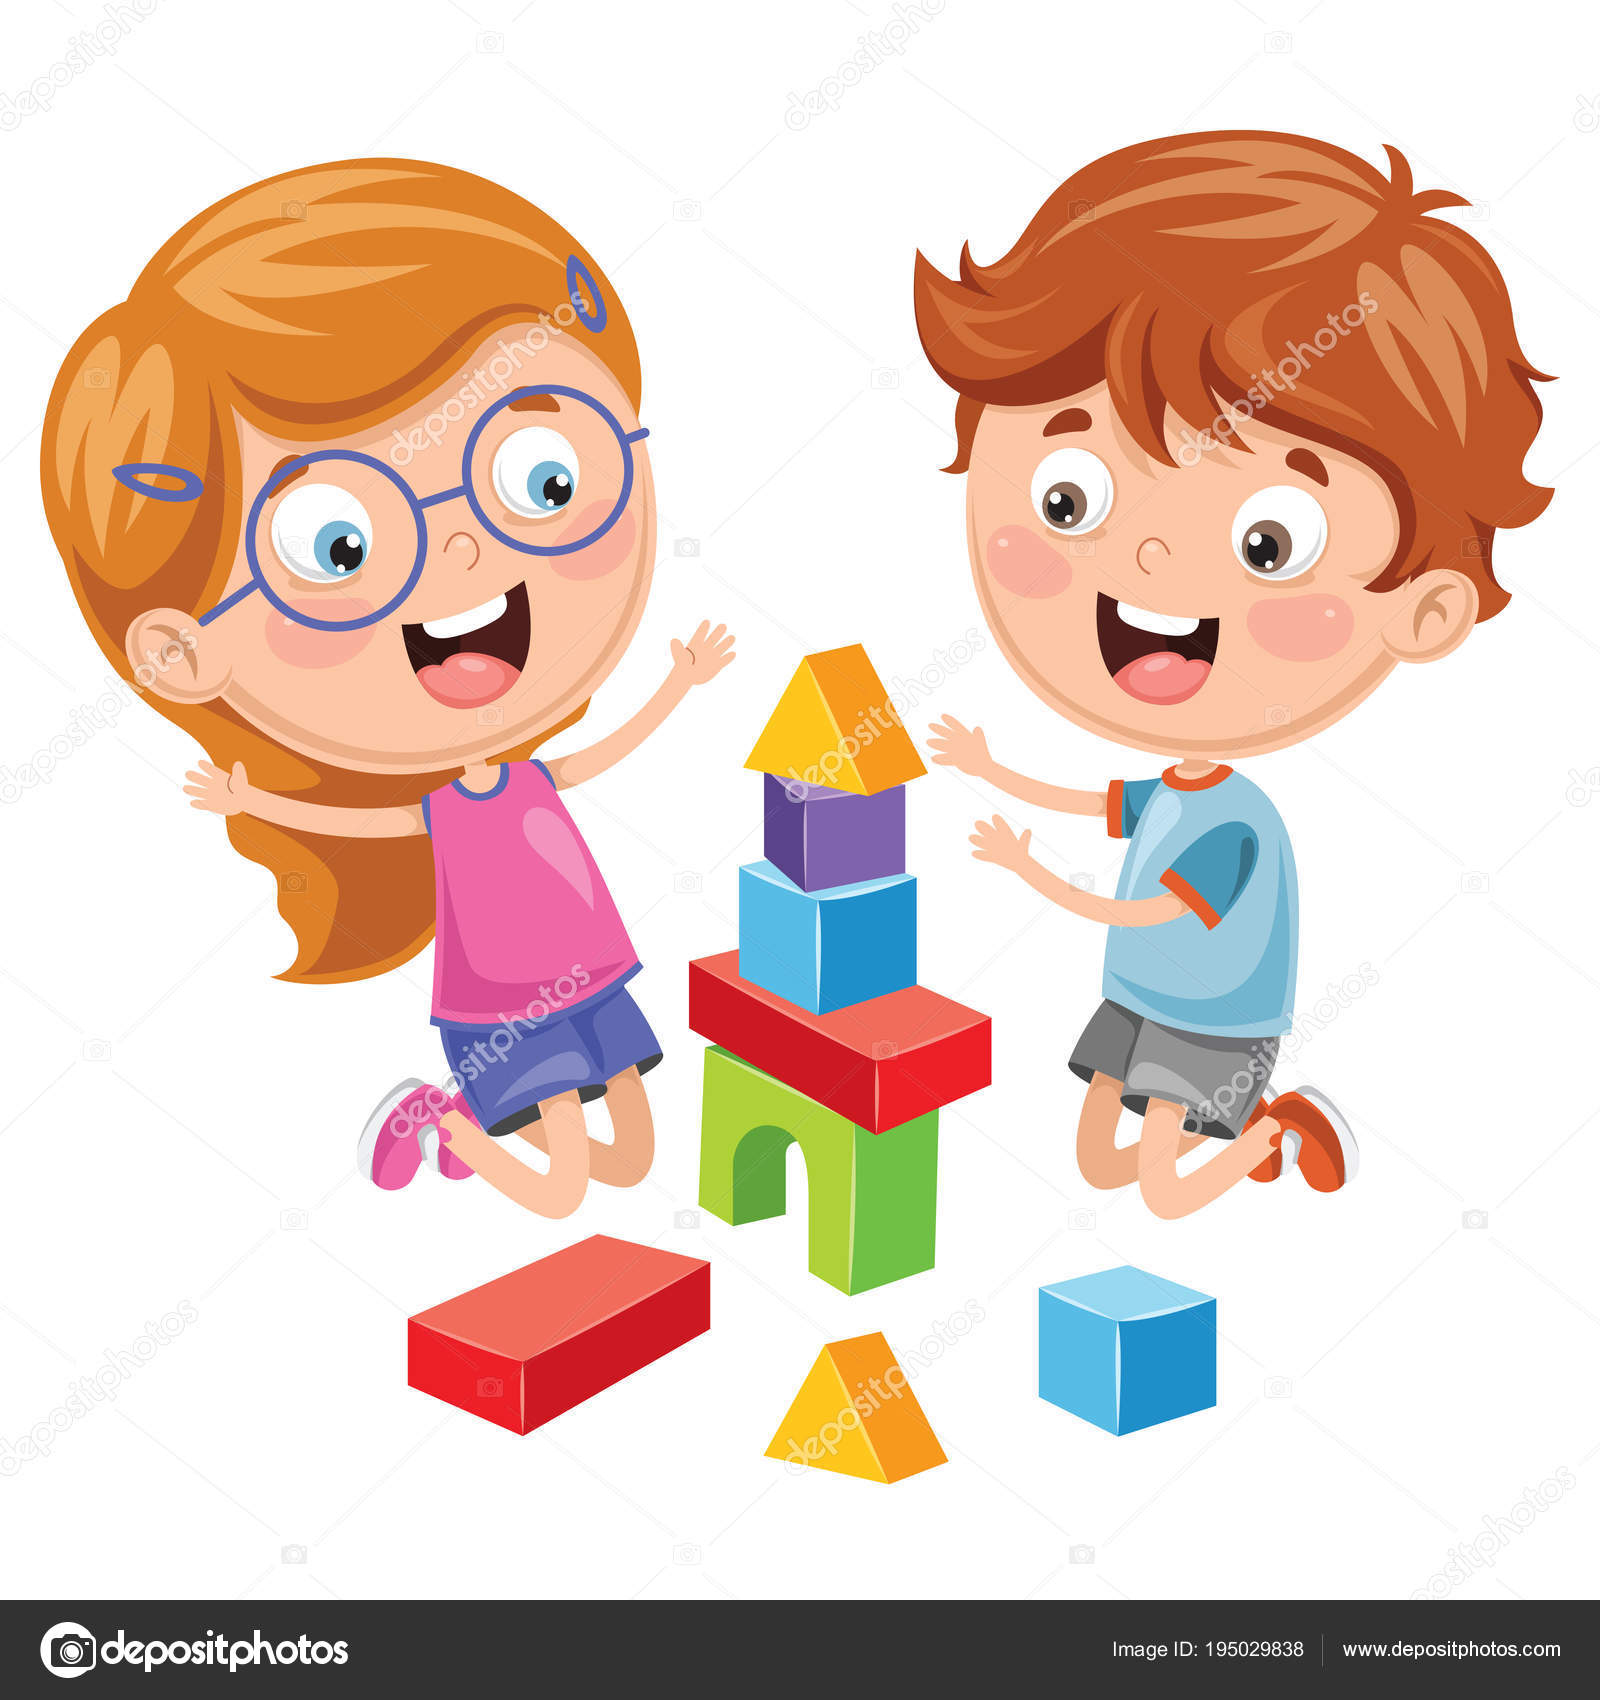 Kids playing video games Vectors & Illustrations for Free Download